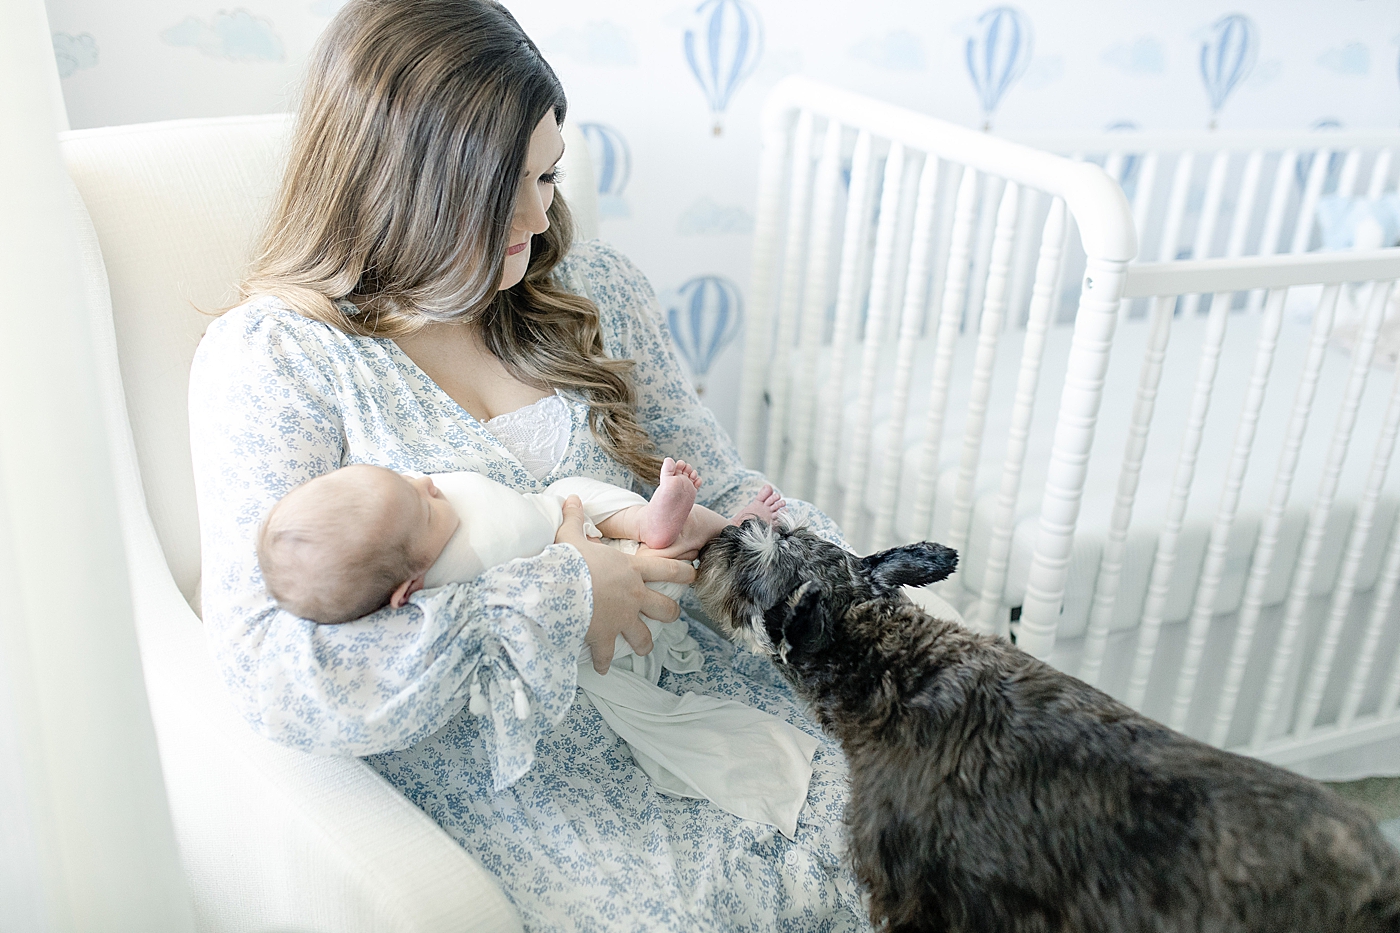 Puppy sniffing newborns toes while mom holds him | Photo by Little Sunshine Photography